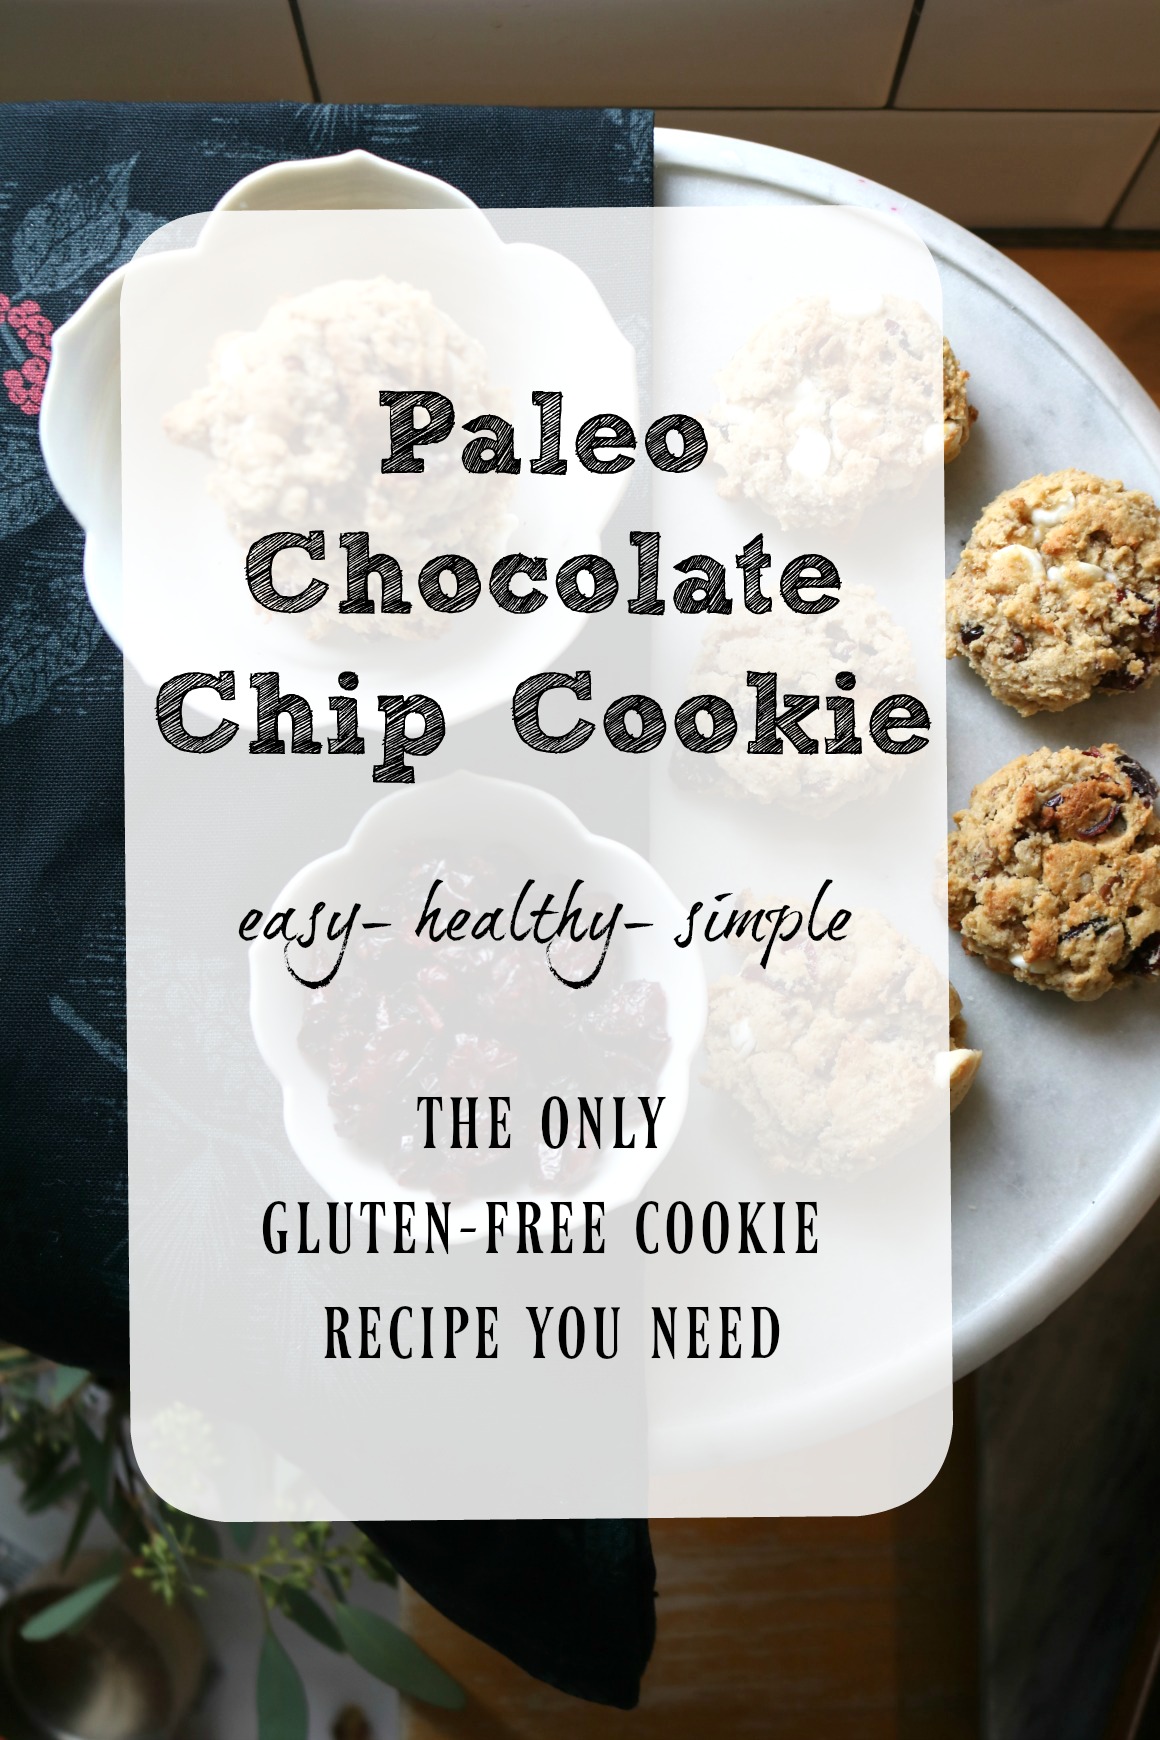 Paleo and Gluten Free Cranberry Chocolate Chip Cookies